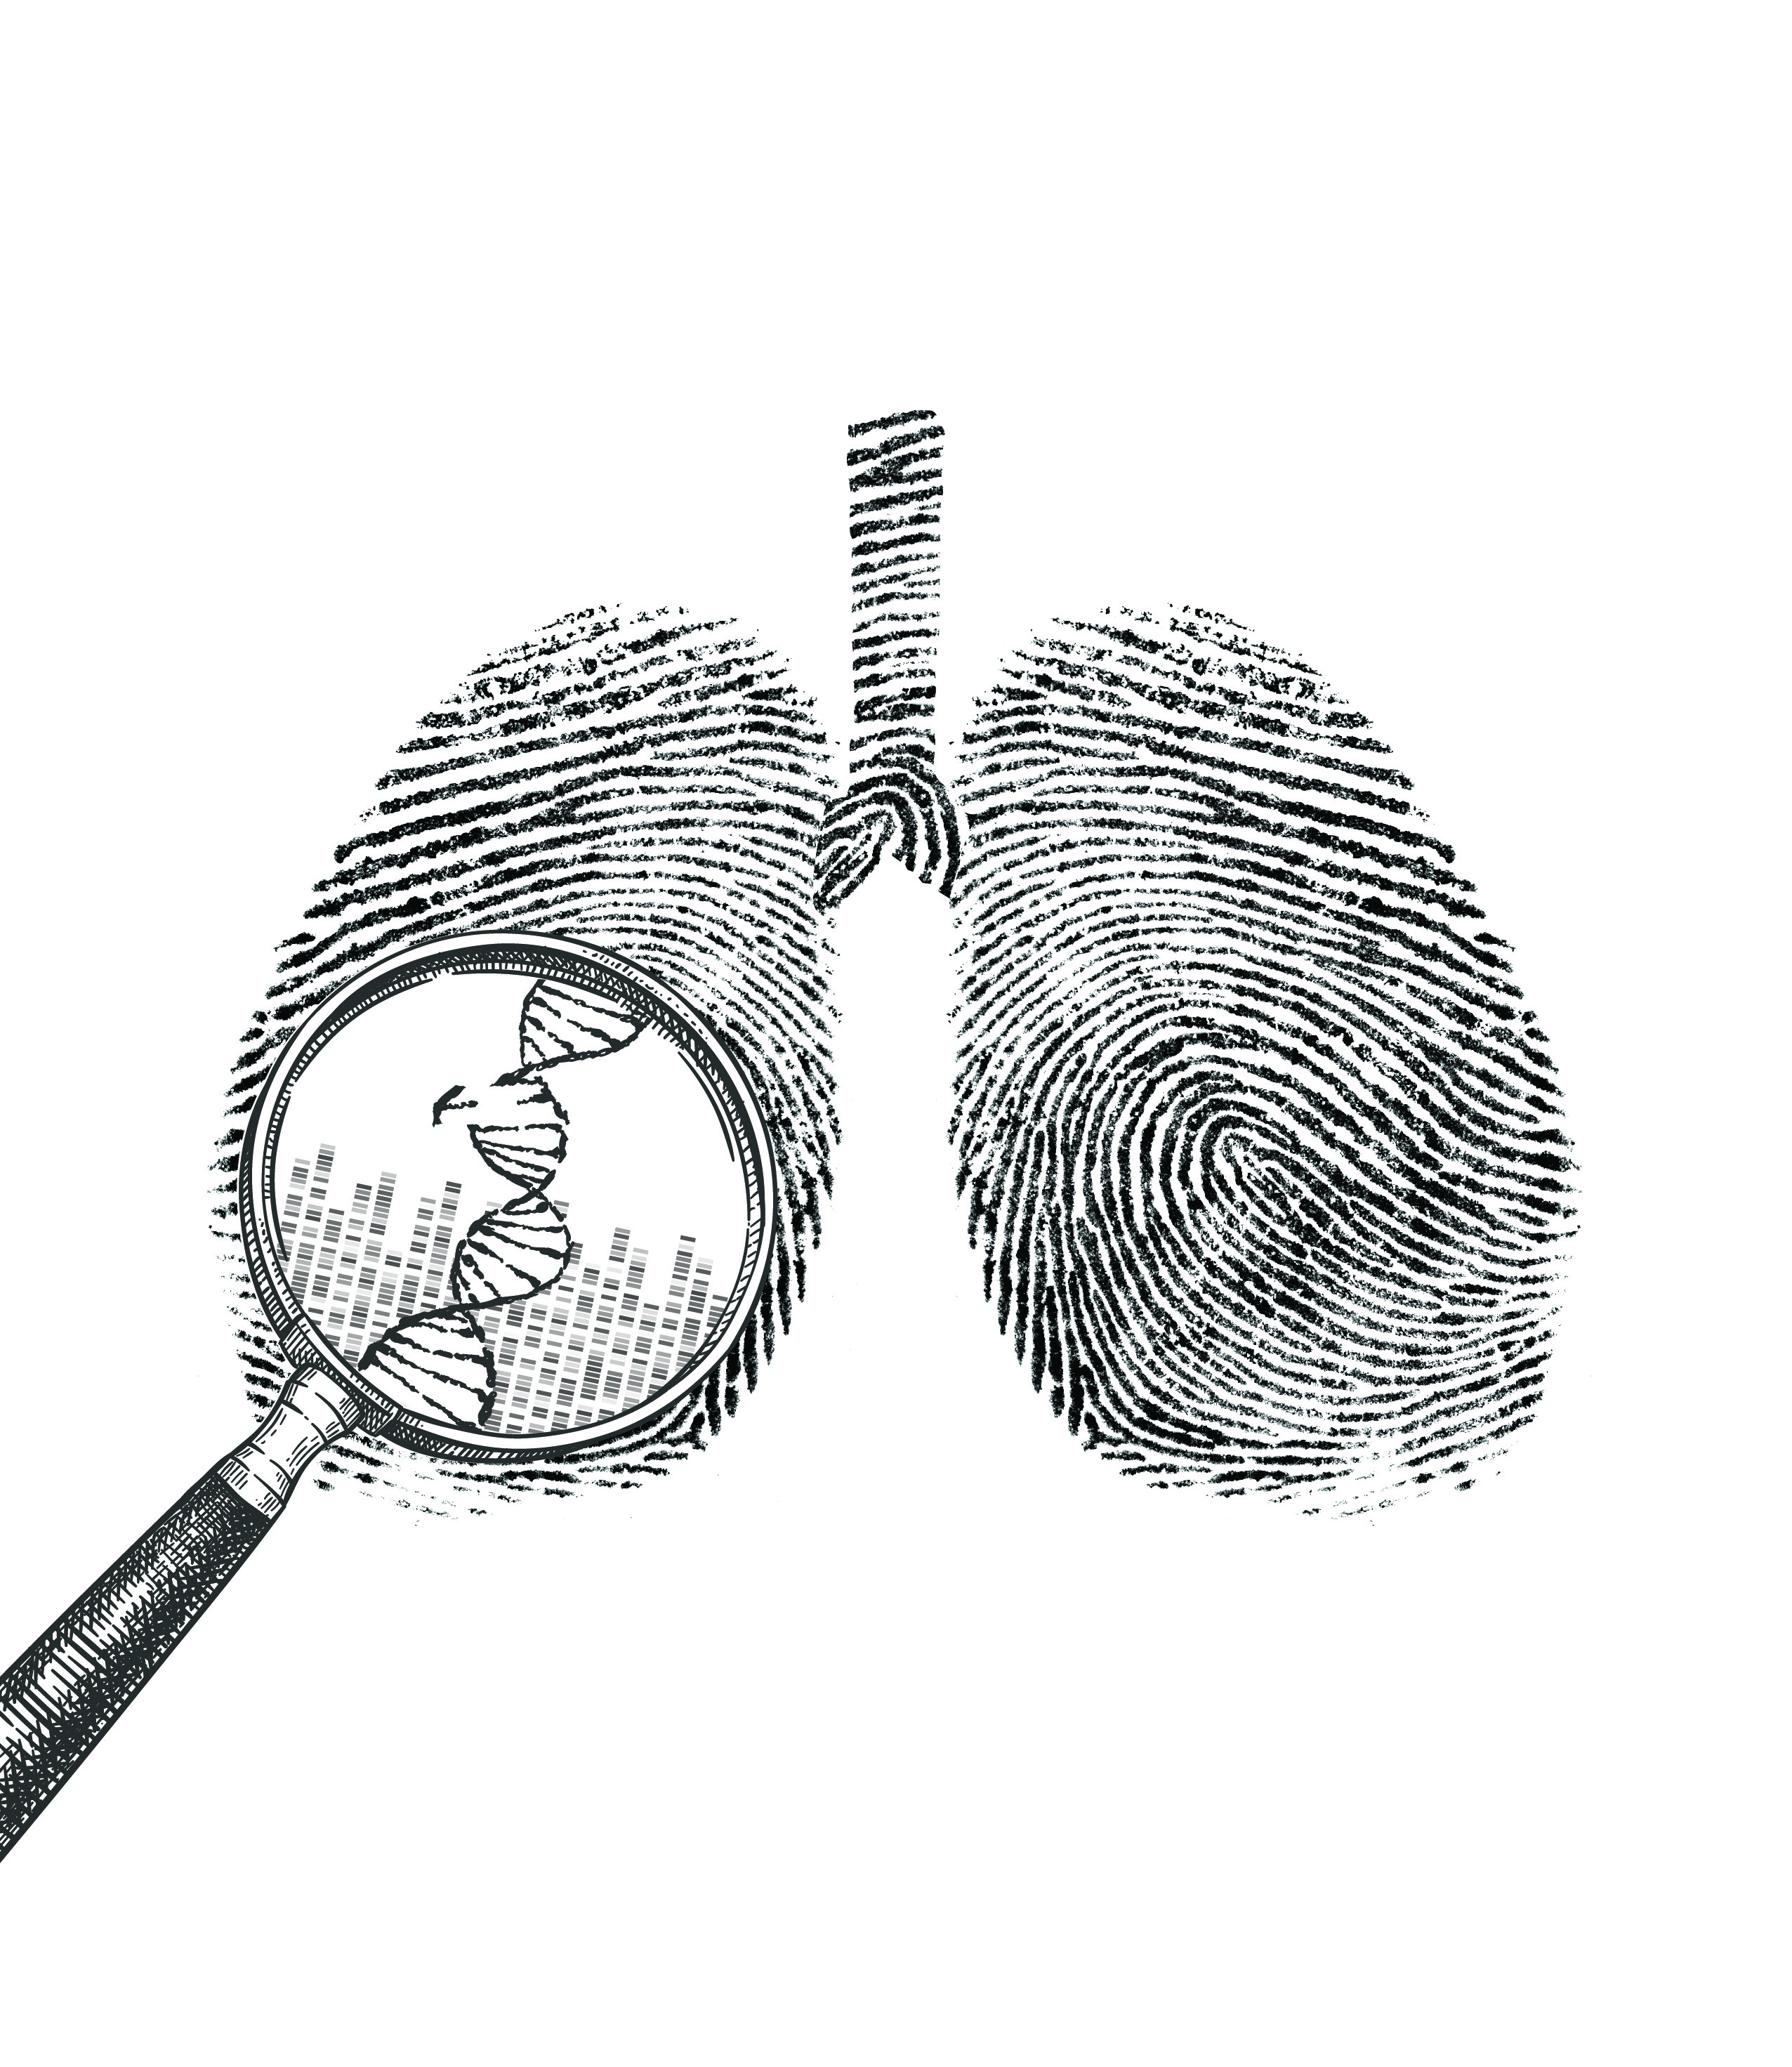 Illustration of lungs made up of DNA sequences. A magnifying glass hovers over a portion of a DNA sequence showing a mutational change.